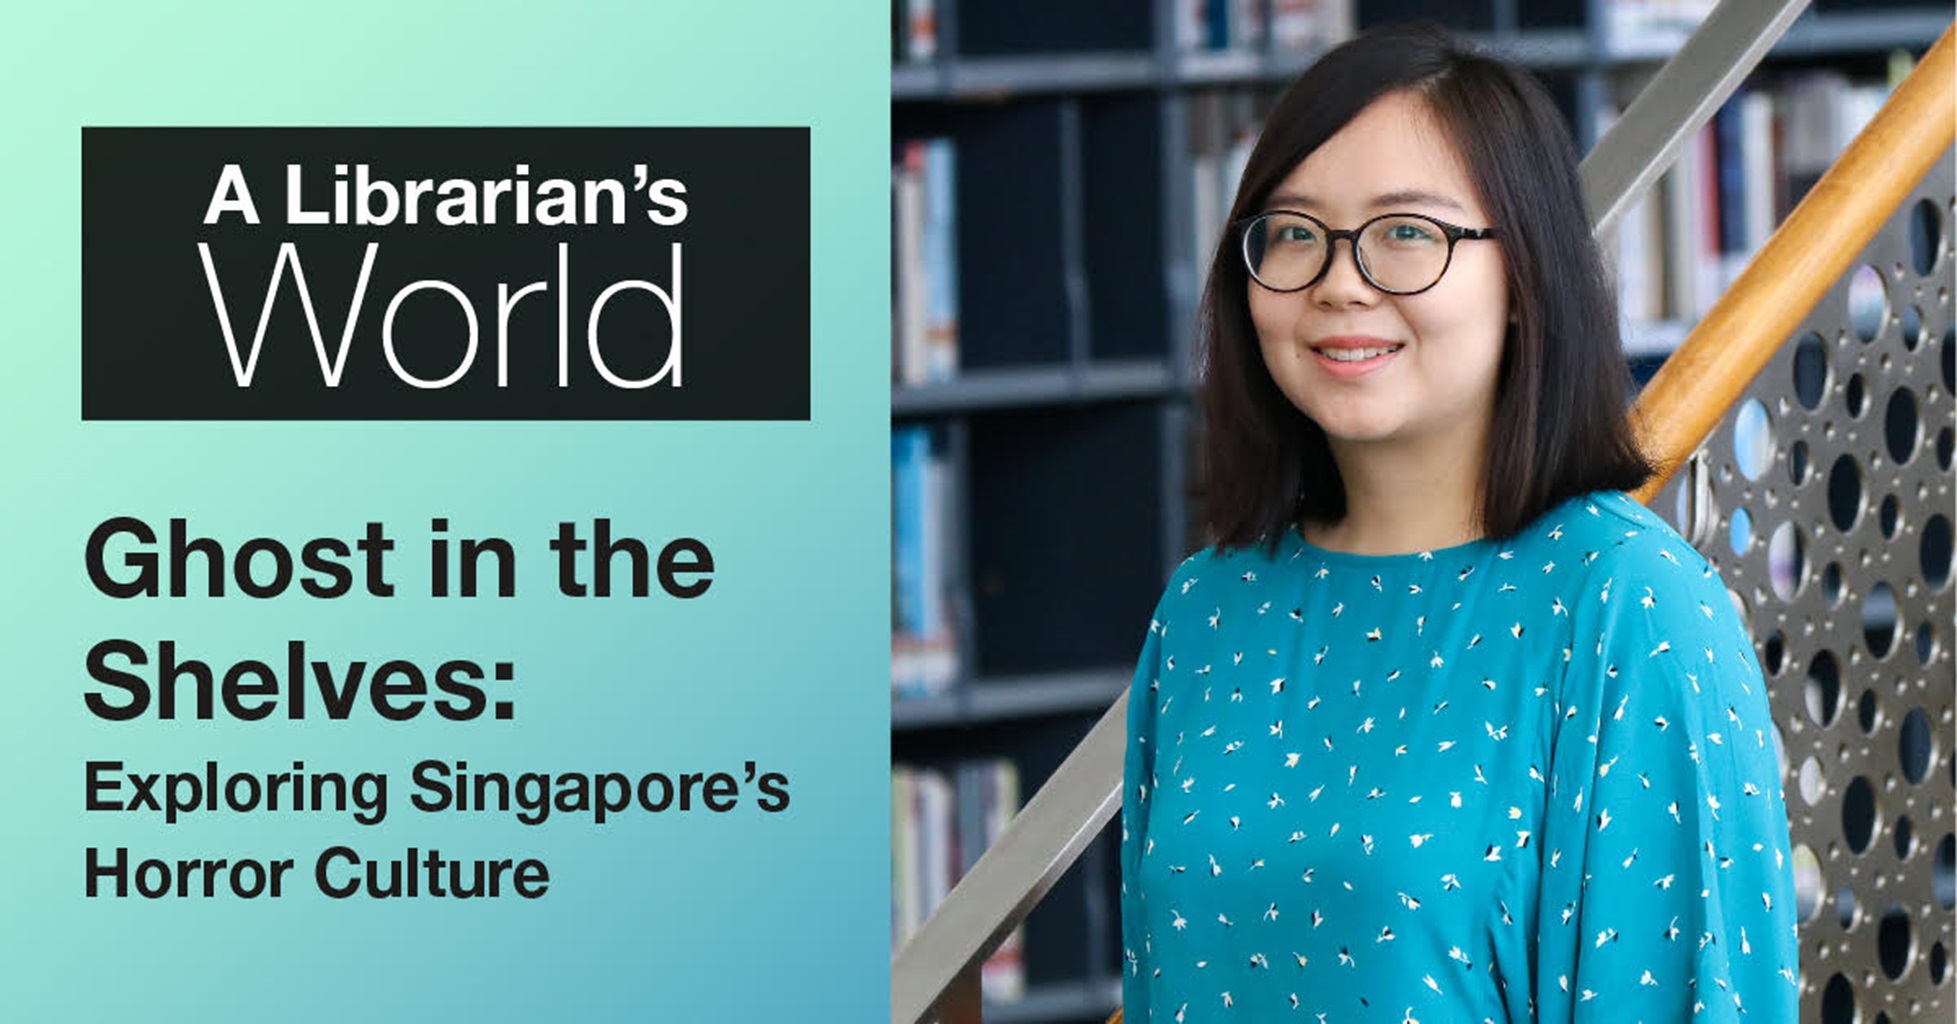 [ONLINE SCREENING] A Librarian's World Jacqueline Lee: Ghost in the Shelves  - Exploring Singapore's Horror Culture